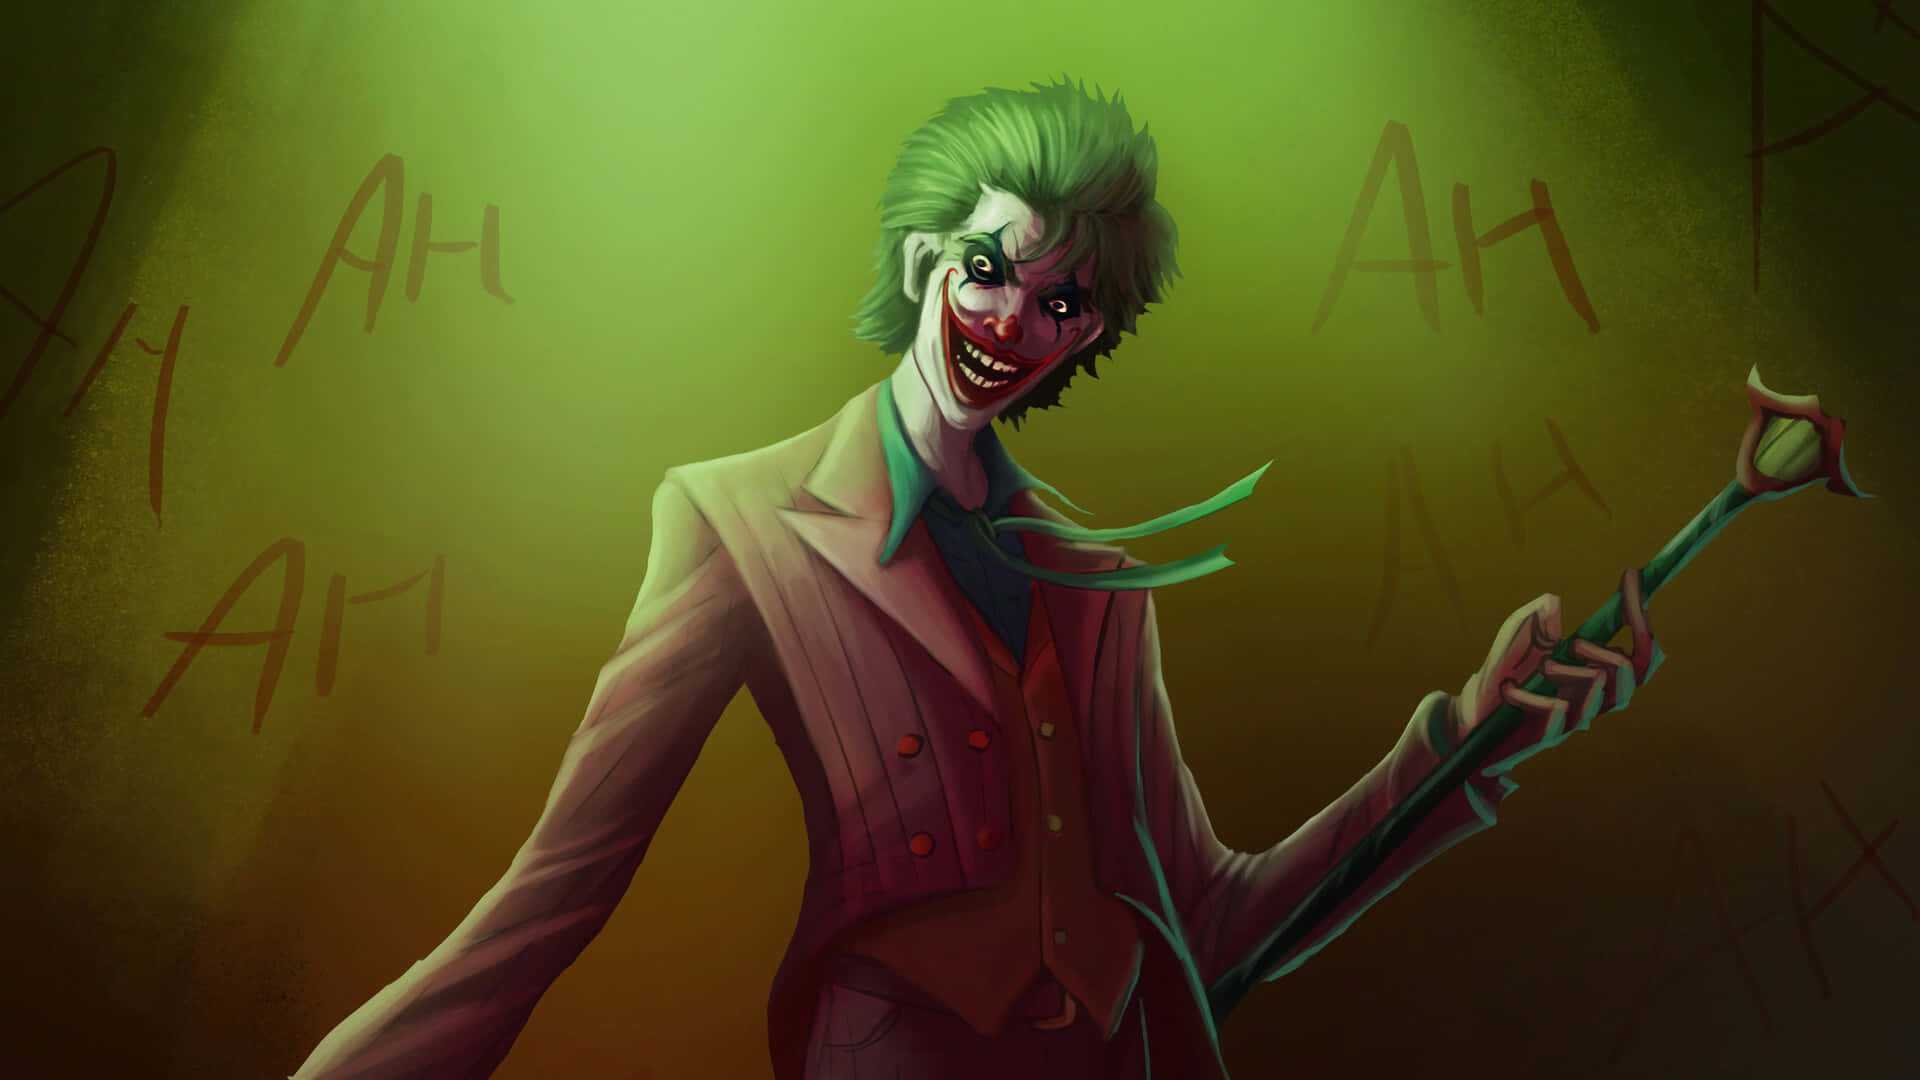 The Joker flaunting his notorious sinister grin in a comic setting Wallpaper